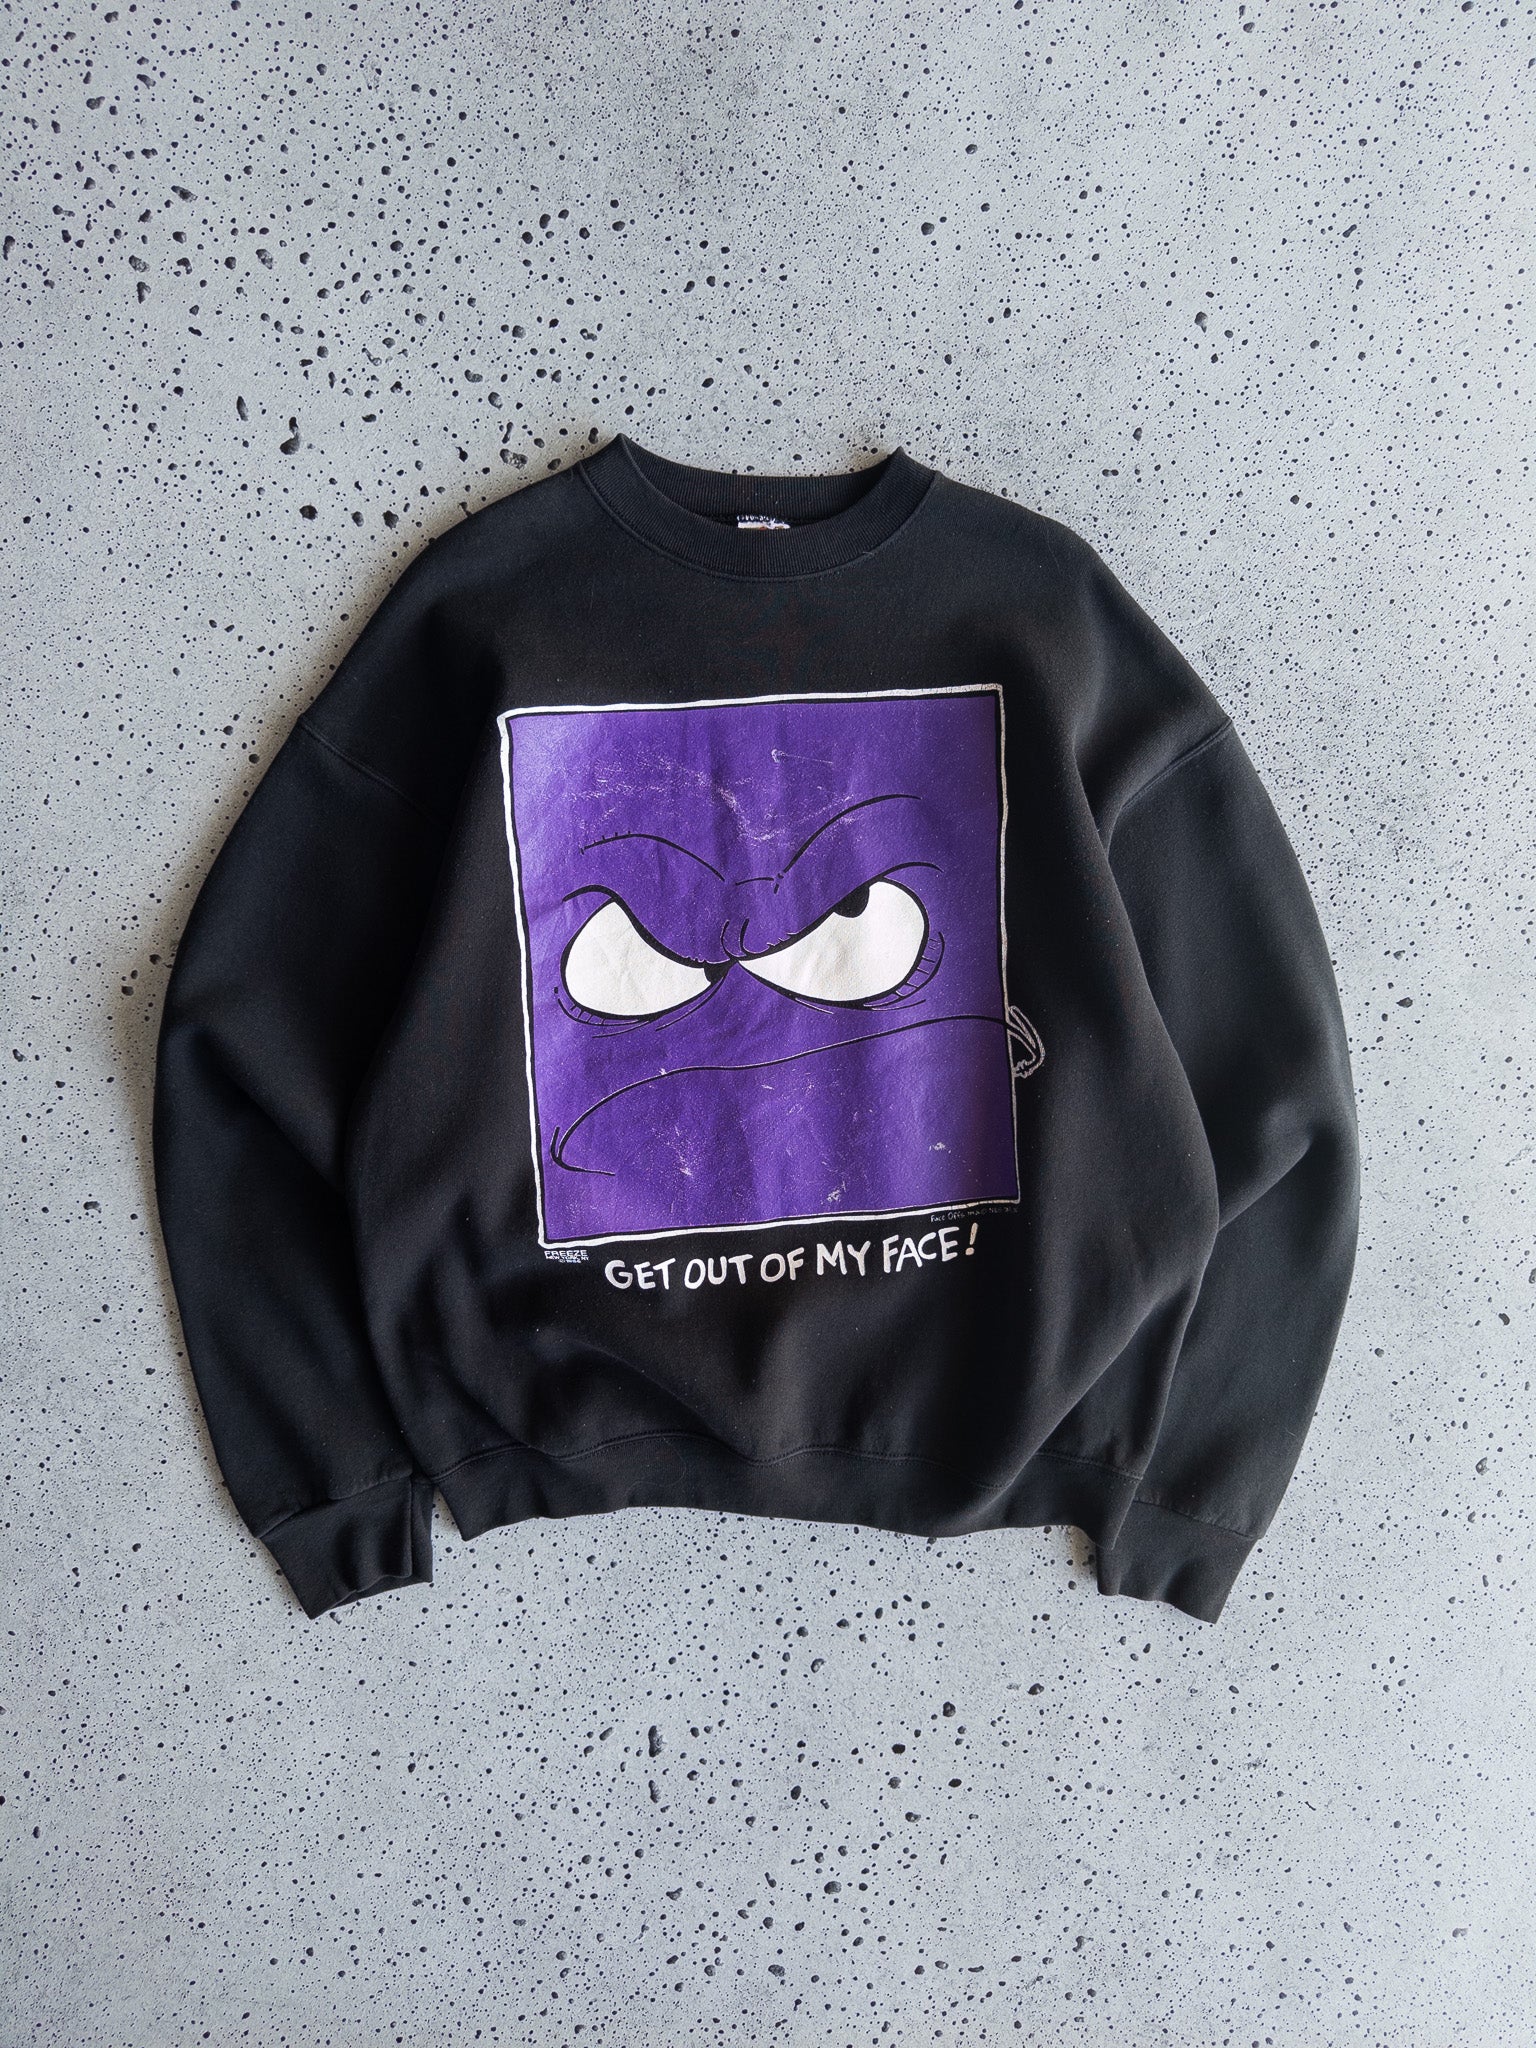 Vintage 'Get Out Of My Face!' 1996 Sweatshirt (XL)